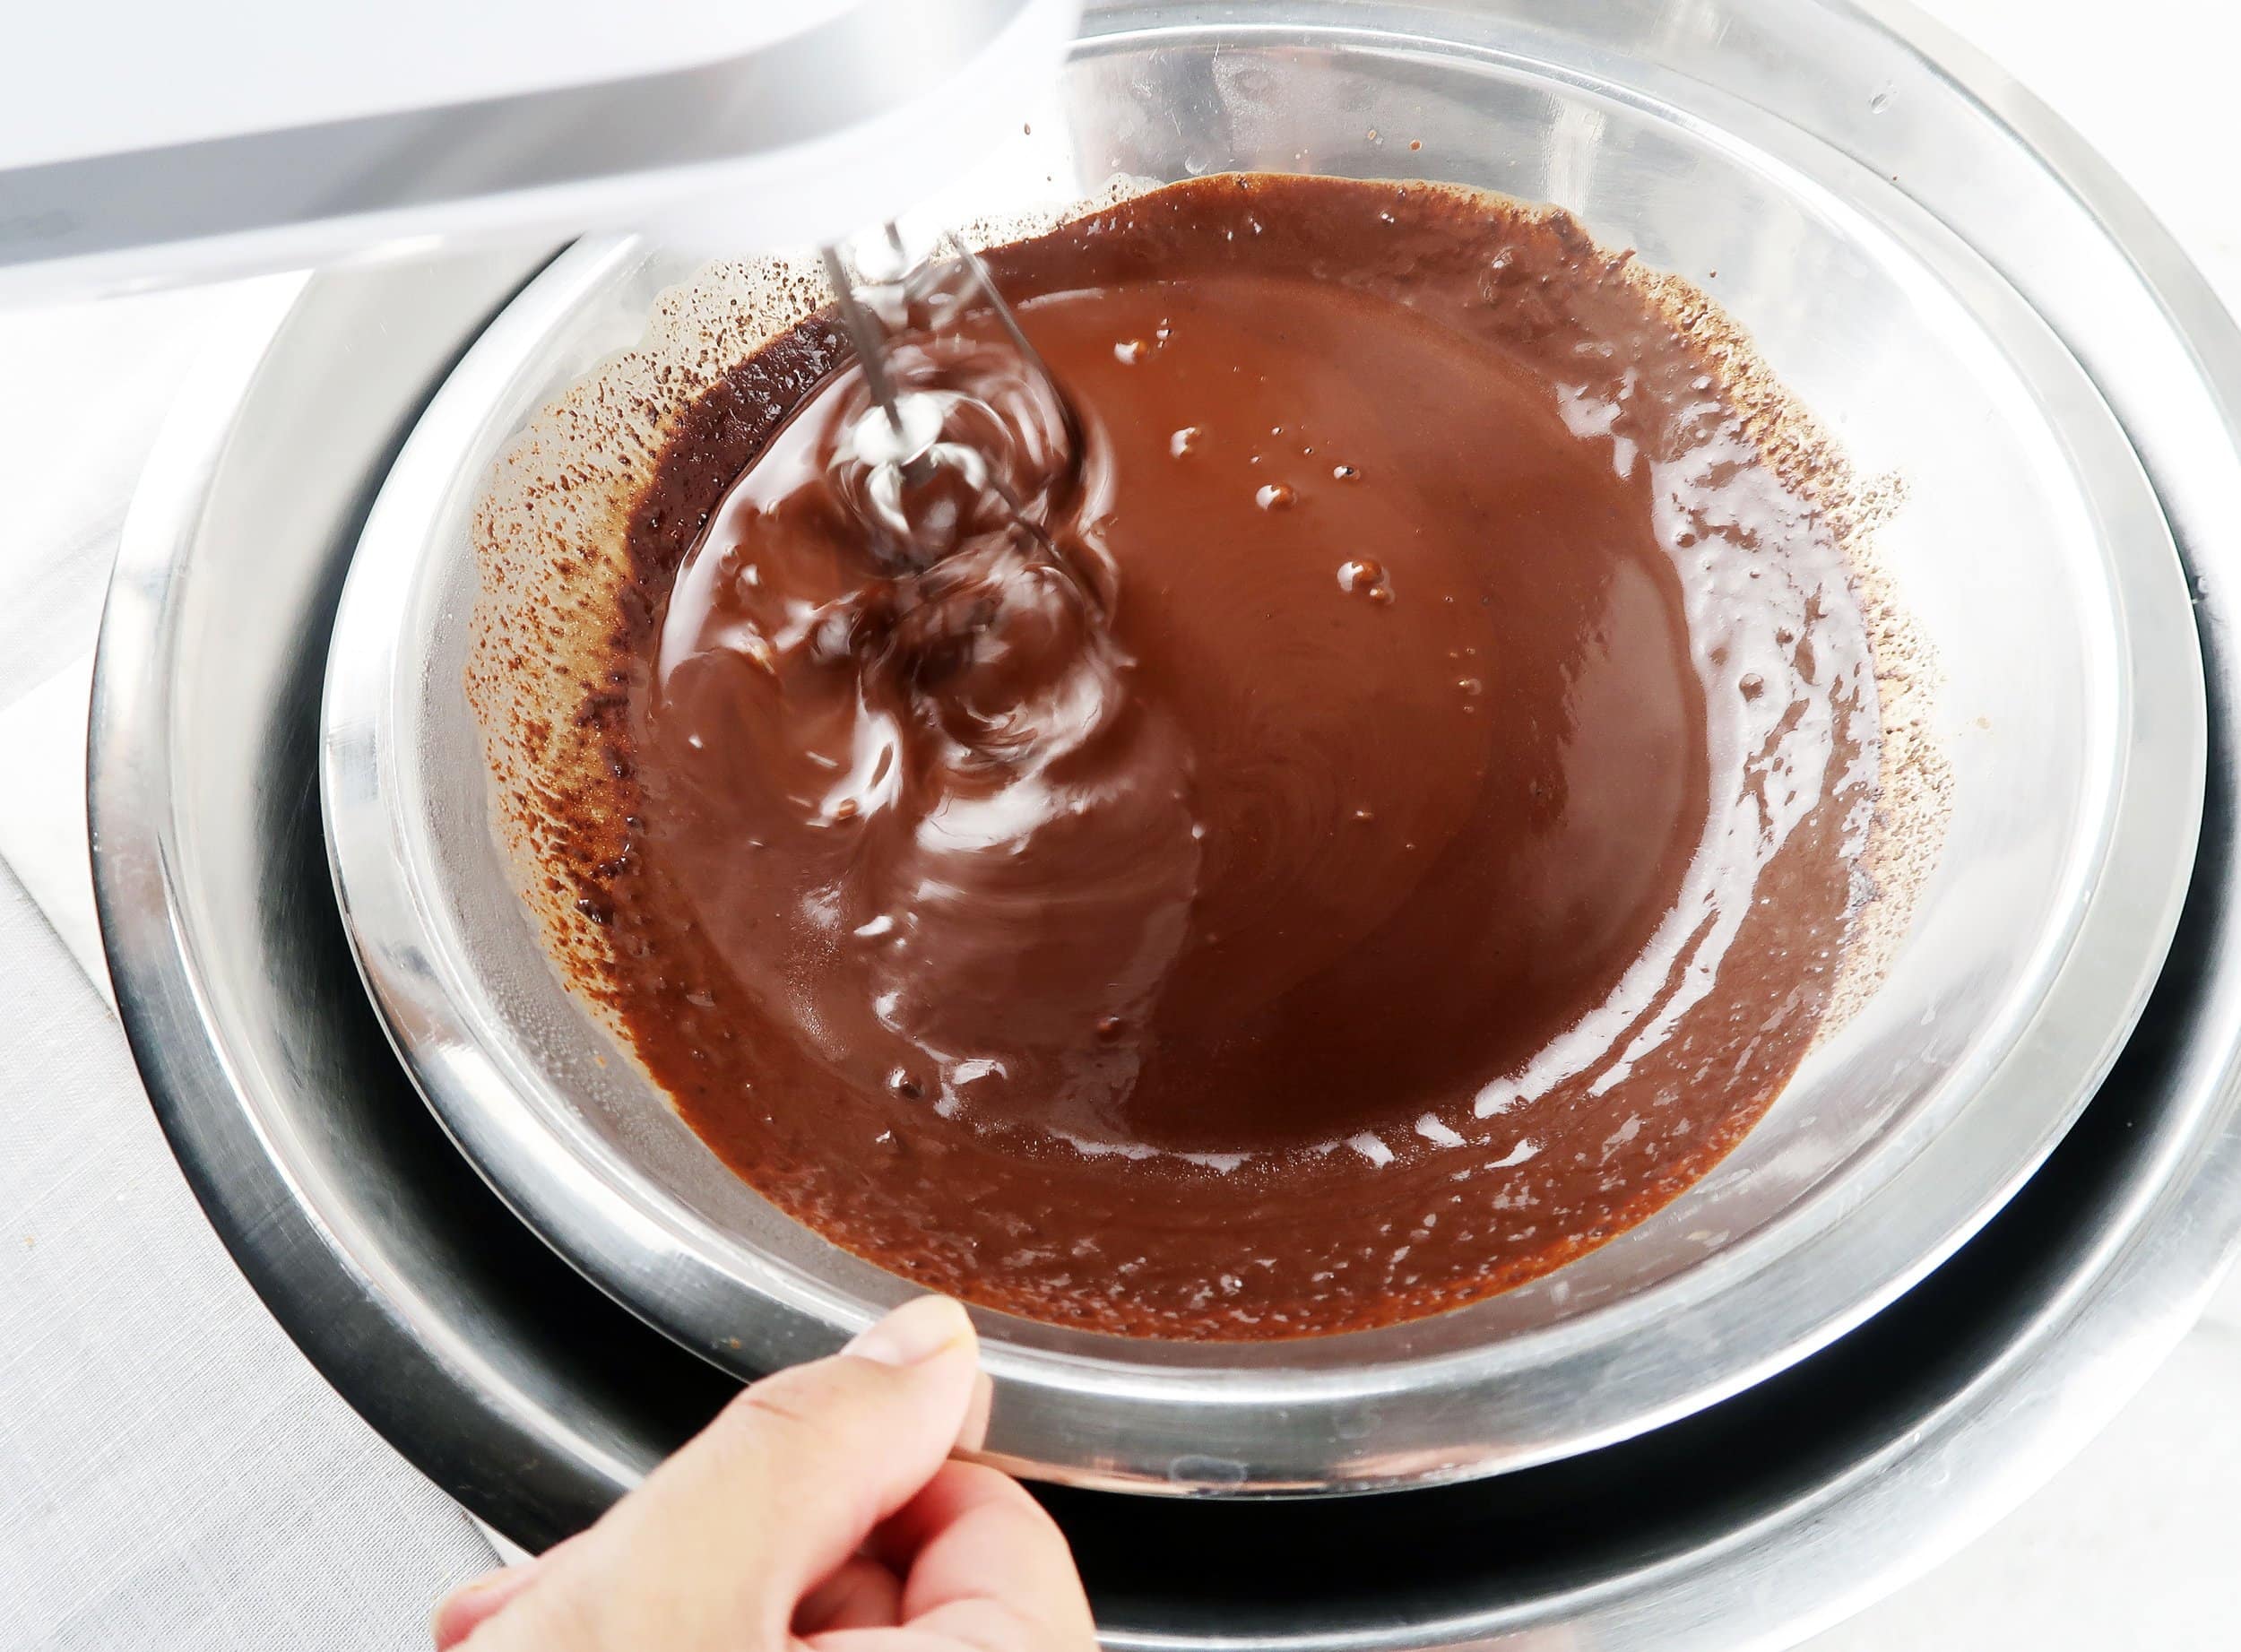 Melted dark chocolate in a bowl surrounded by an ice bath.